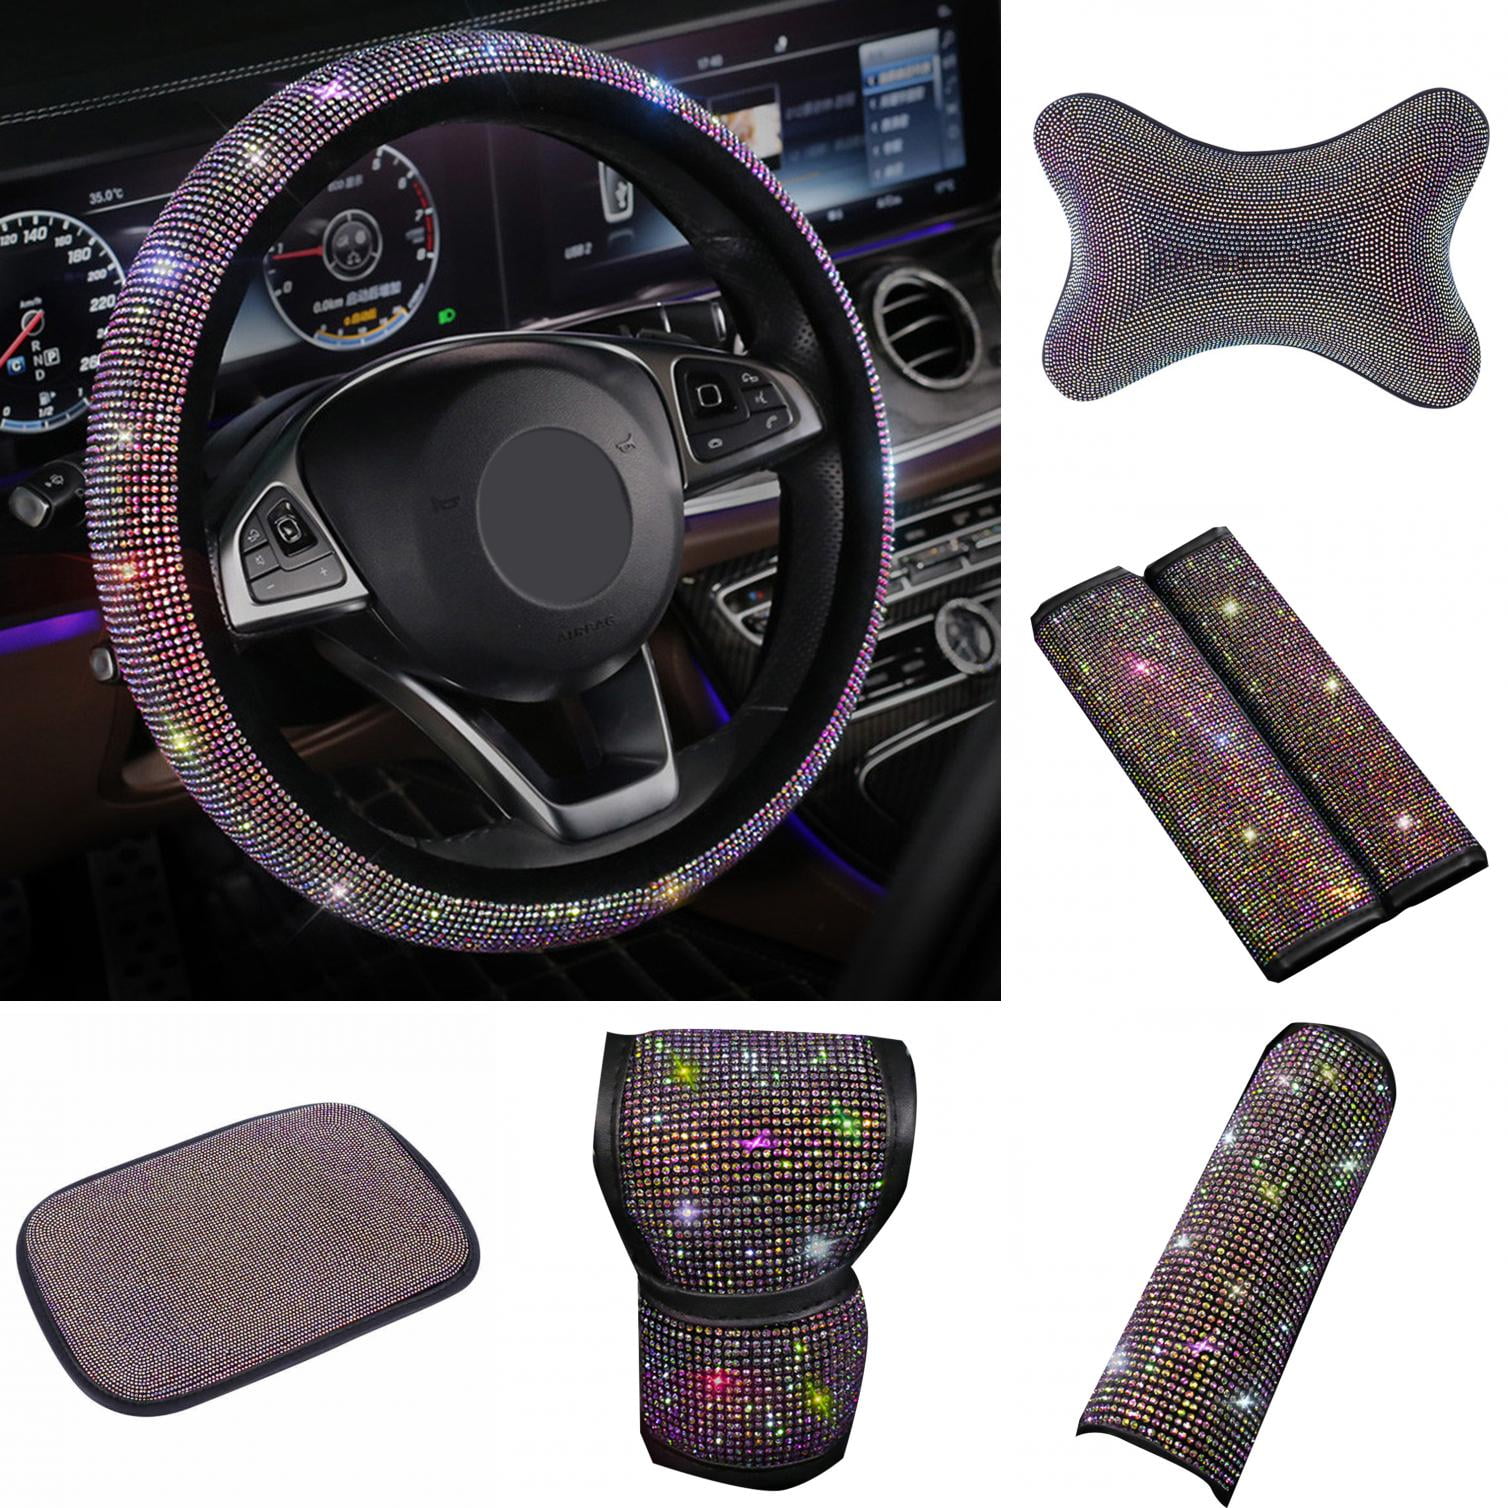 5 Pieces Car Bling Seat Belt Covers Shoulder Pads Glitter Gear Shift Cover Sparkling Handbrake Cover and Girly Car Decor Ring Bling Car Accessories Set for Women 